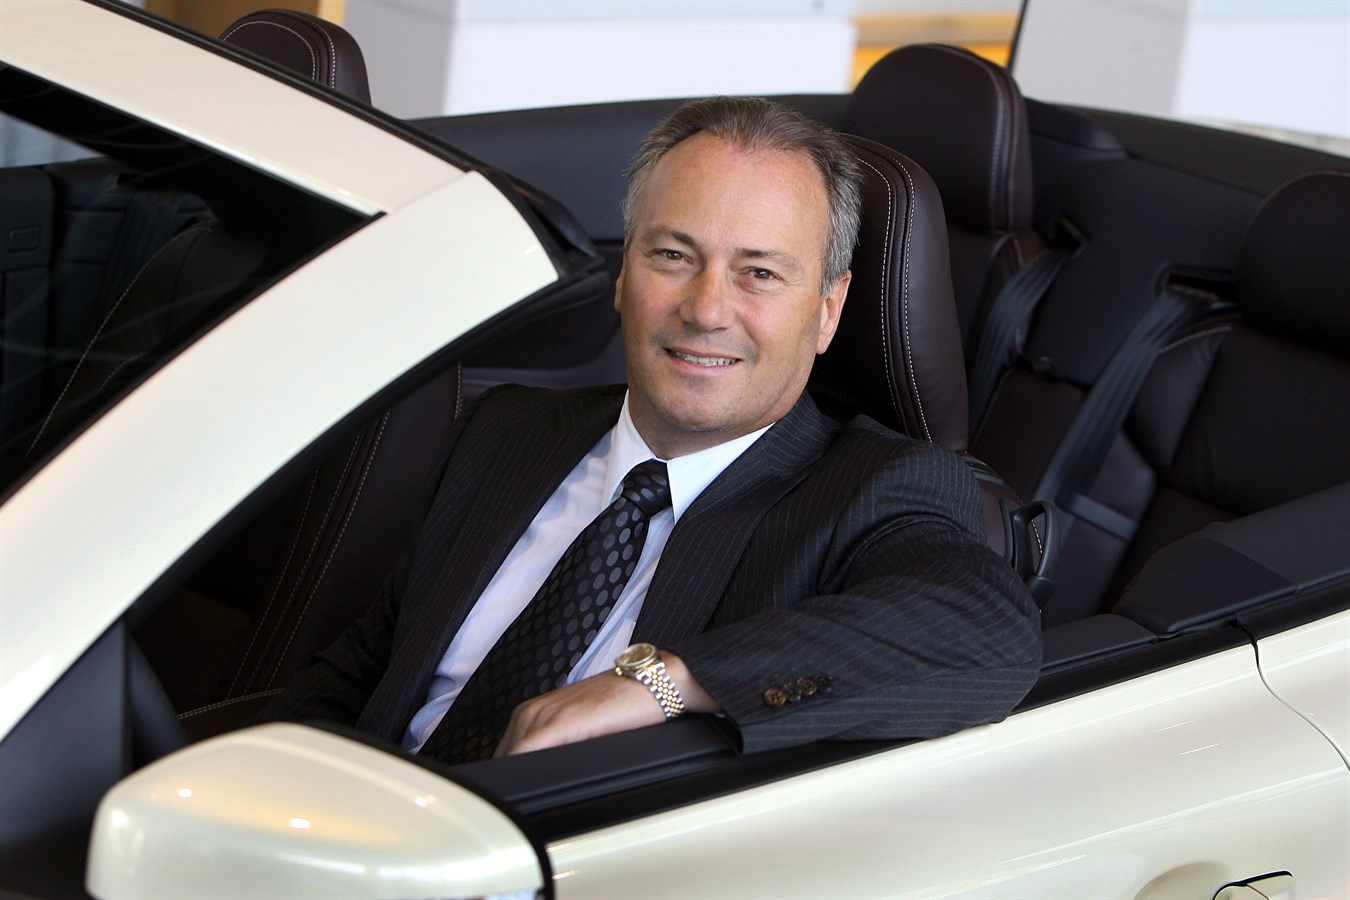 Stephen Odell, President and CEO of Volvo Car Corporation as from 1 October 2008